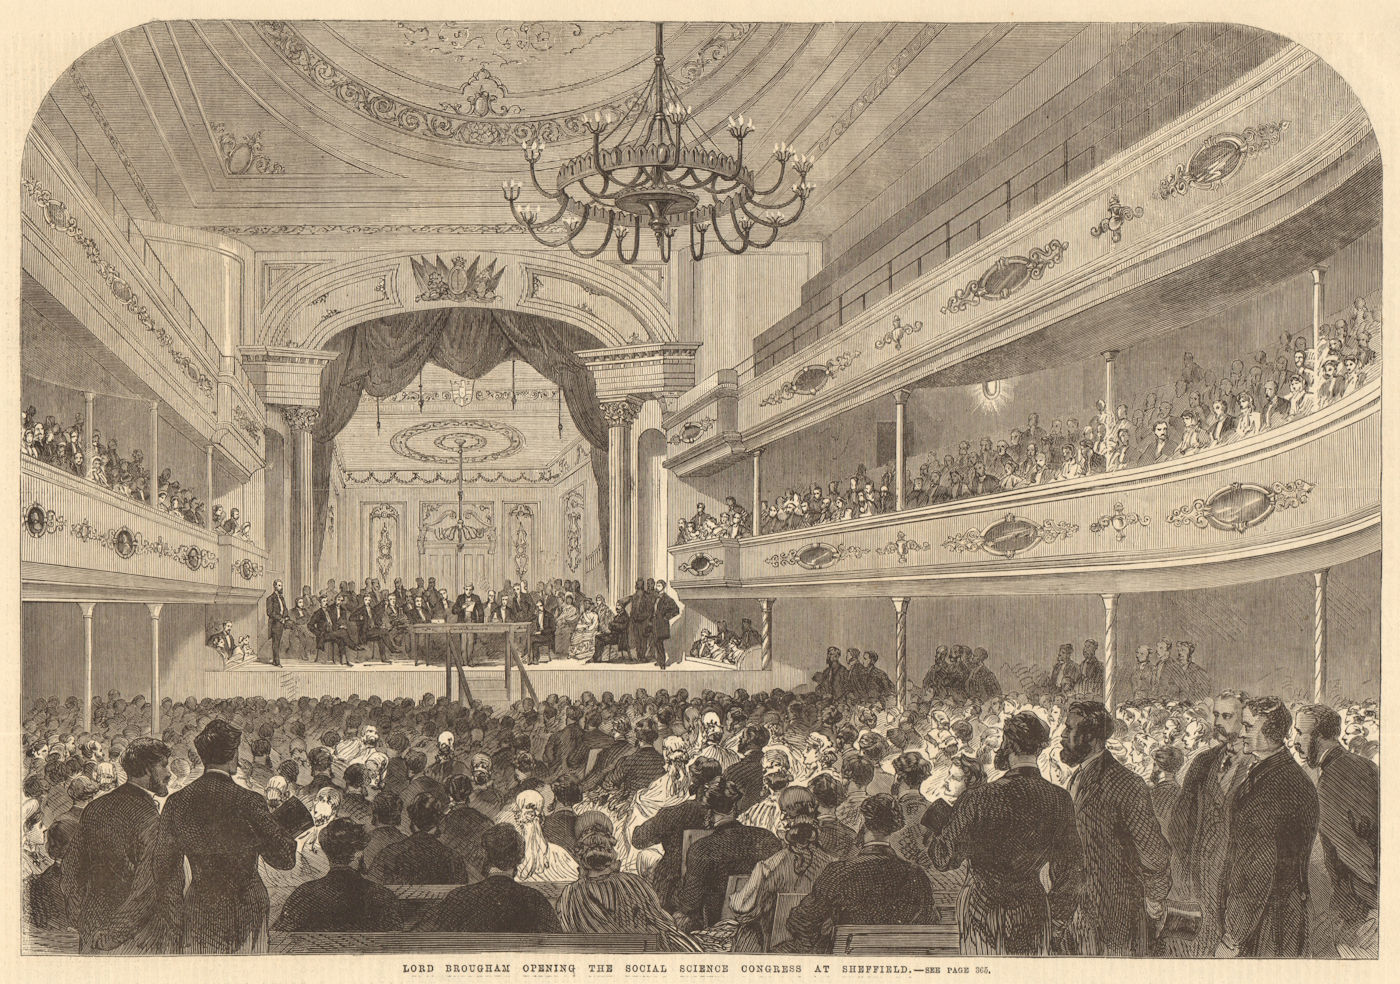 Lord Brougham opening the Social Science Congress at Sheffield. Yorkshire 1865